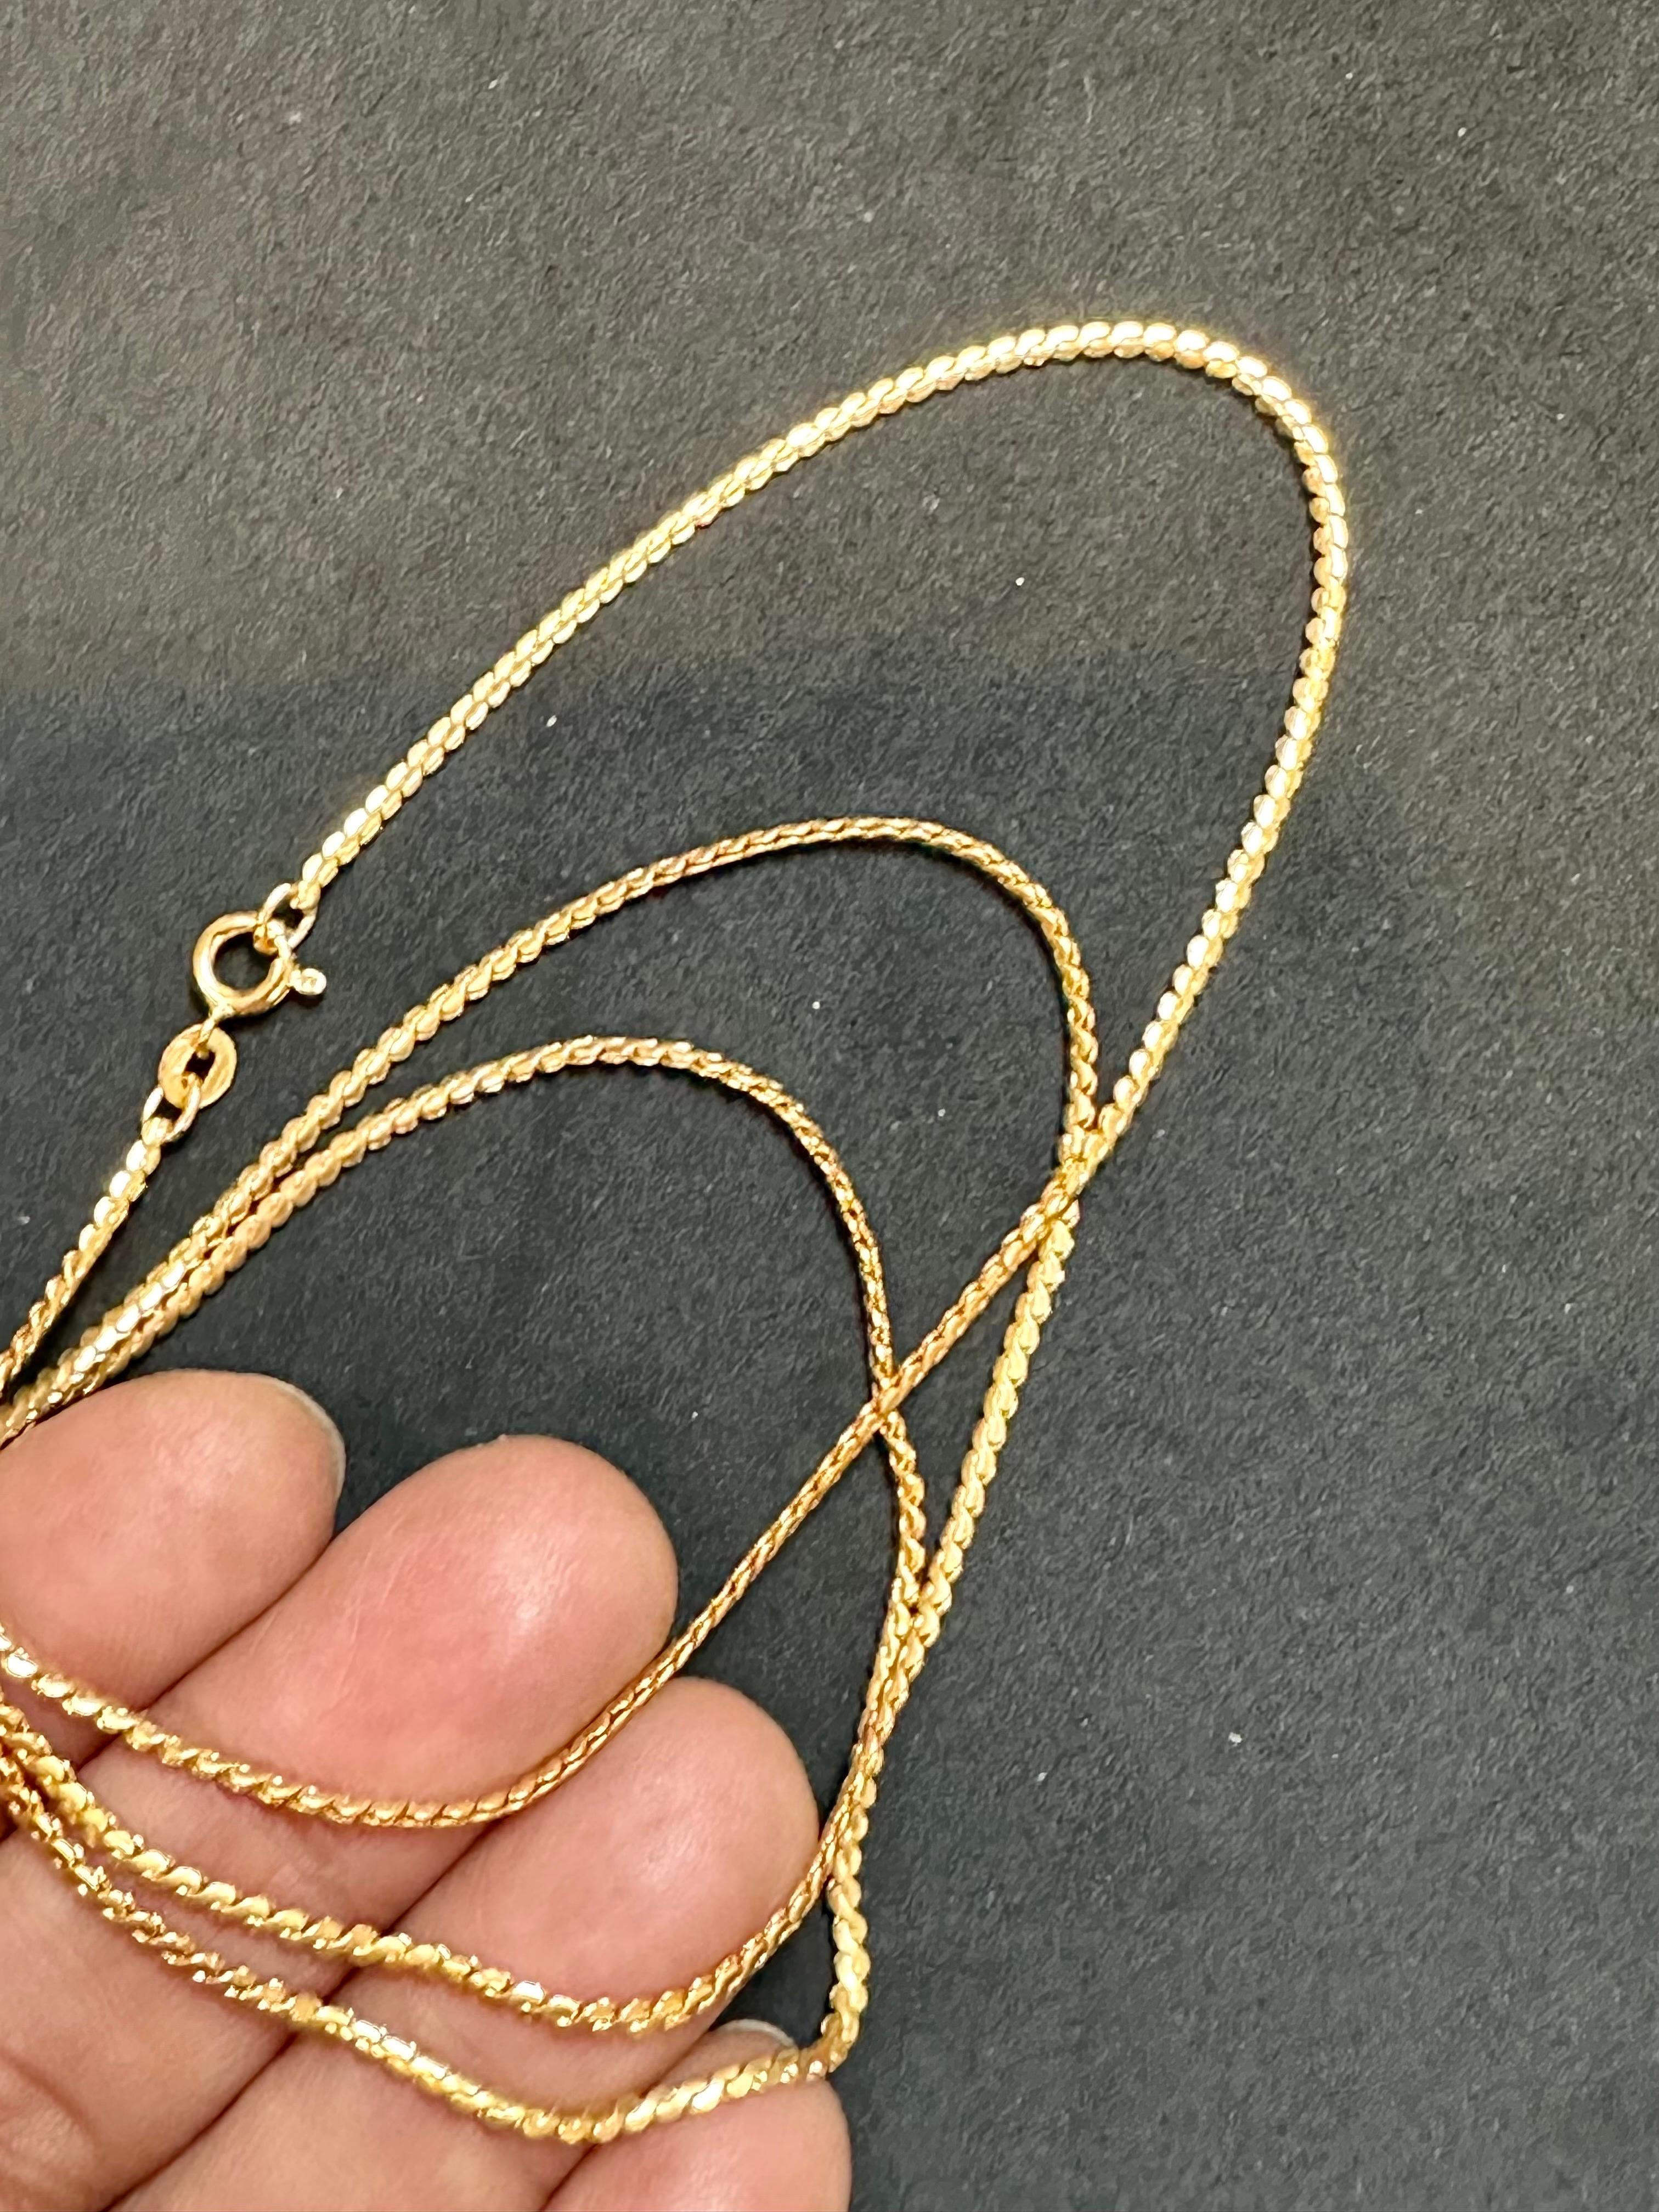 Vintage 18 Karat Yellow Gold 9.6 Gm S Link Chain Necklace For Sale 4